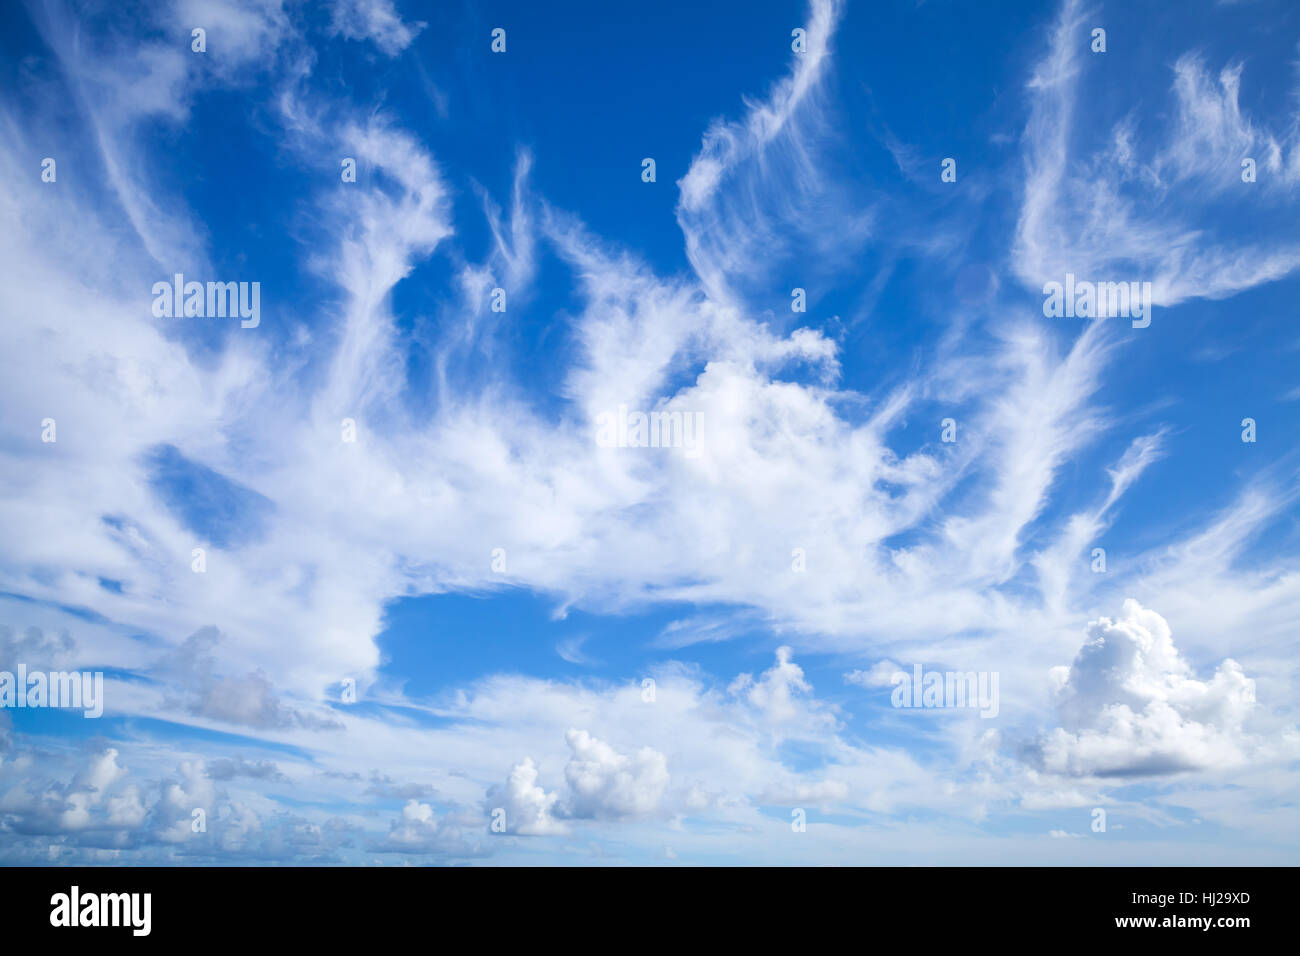 Blue sky with white altocumulus and cirrus clouds layers, natural background photo texture Stock Photo